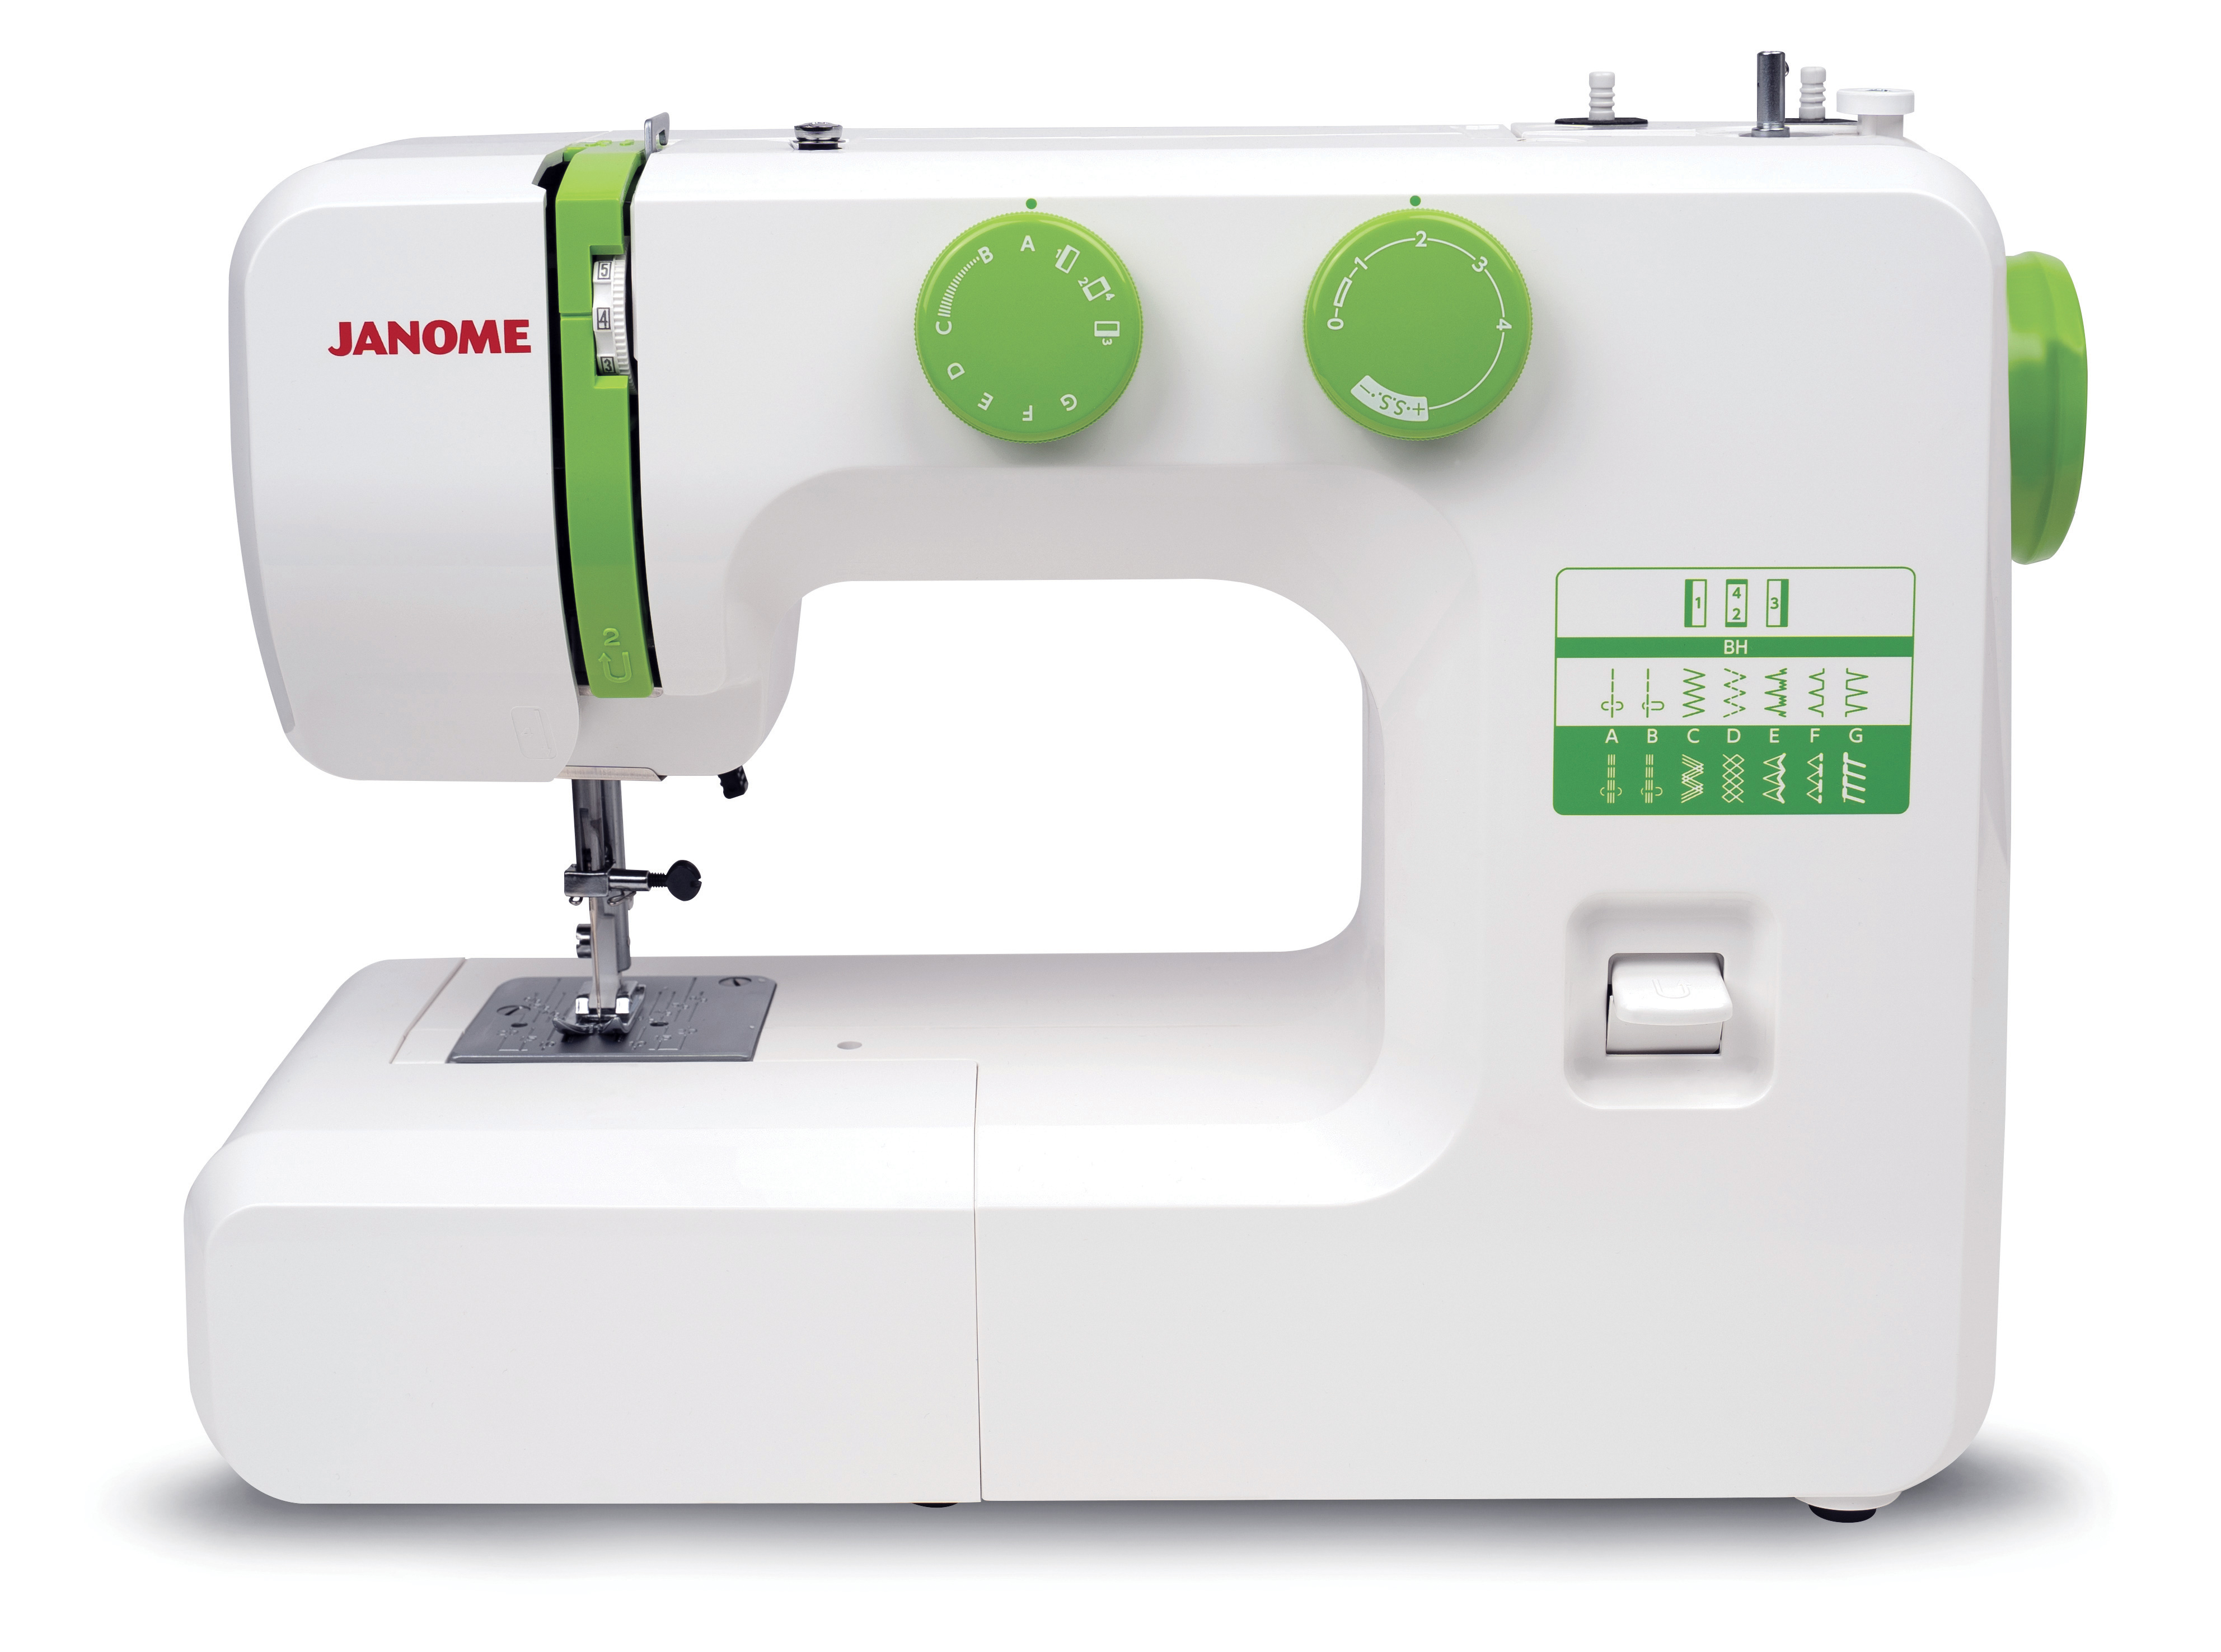 Janome Sewist 725S High Quality Beginner Sewing Machine 